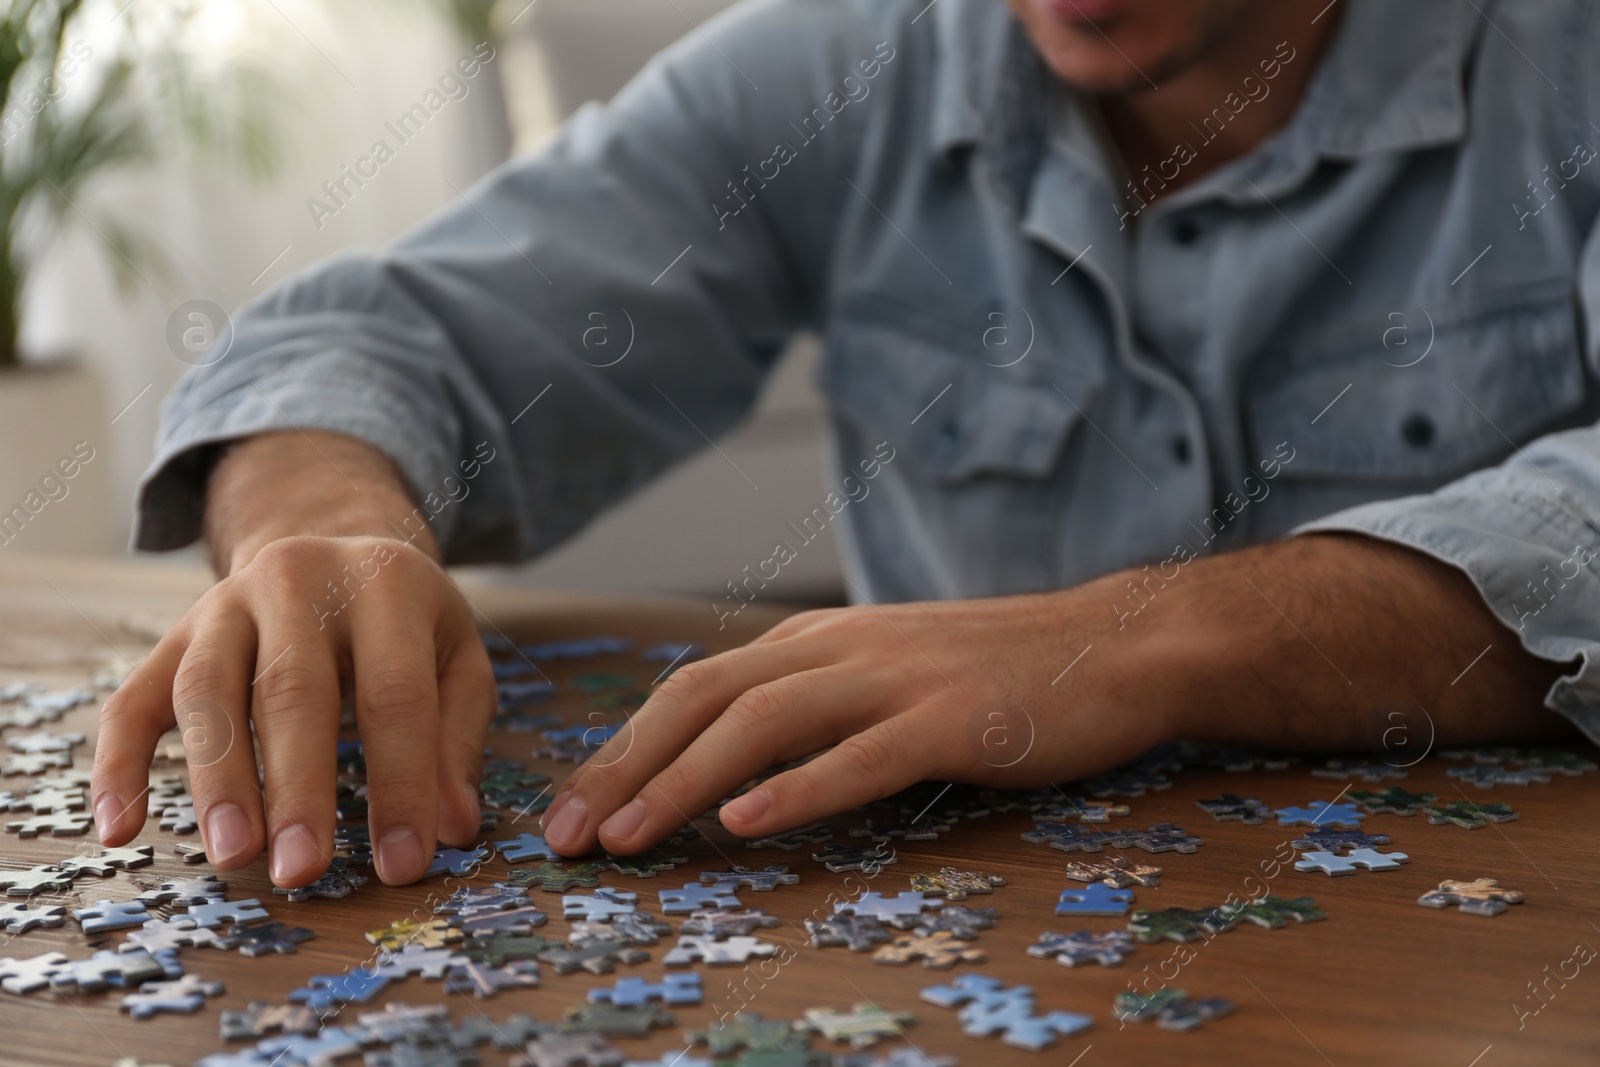 Photo of Man playing with puzzles at wooden table indoors, closeup